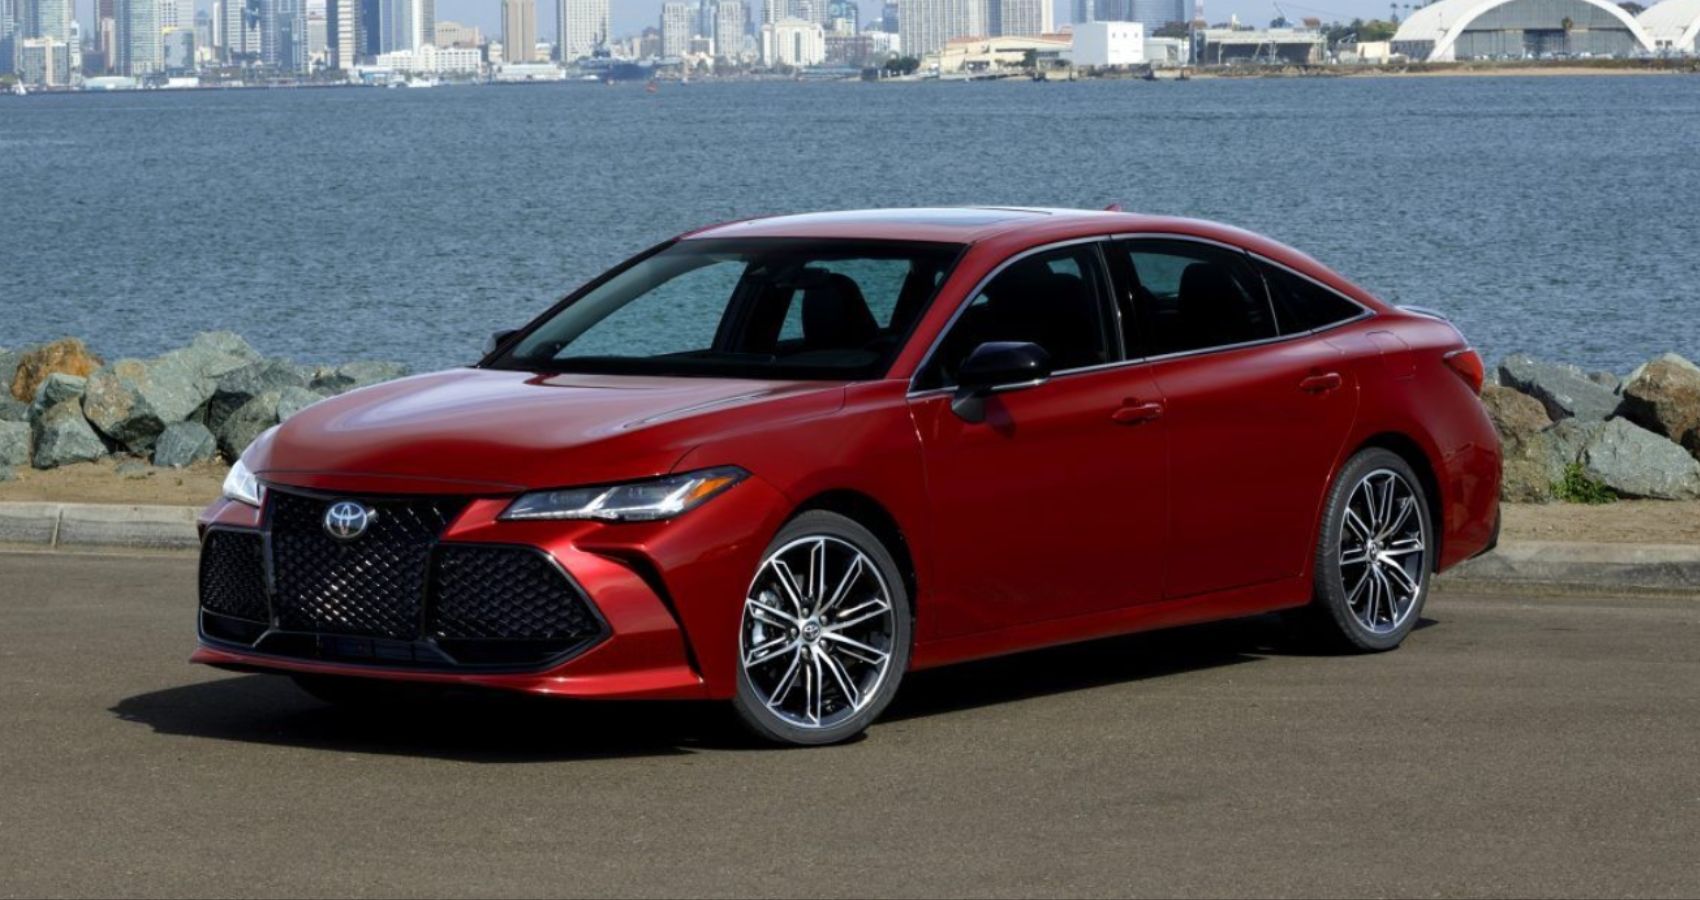 Toyota Avalon to be Discontinued for 2023